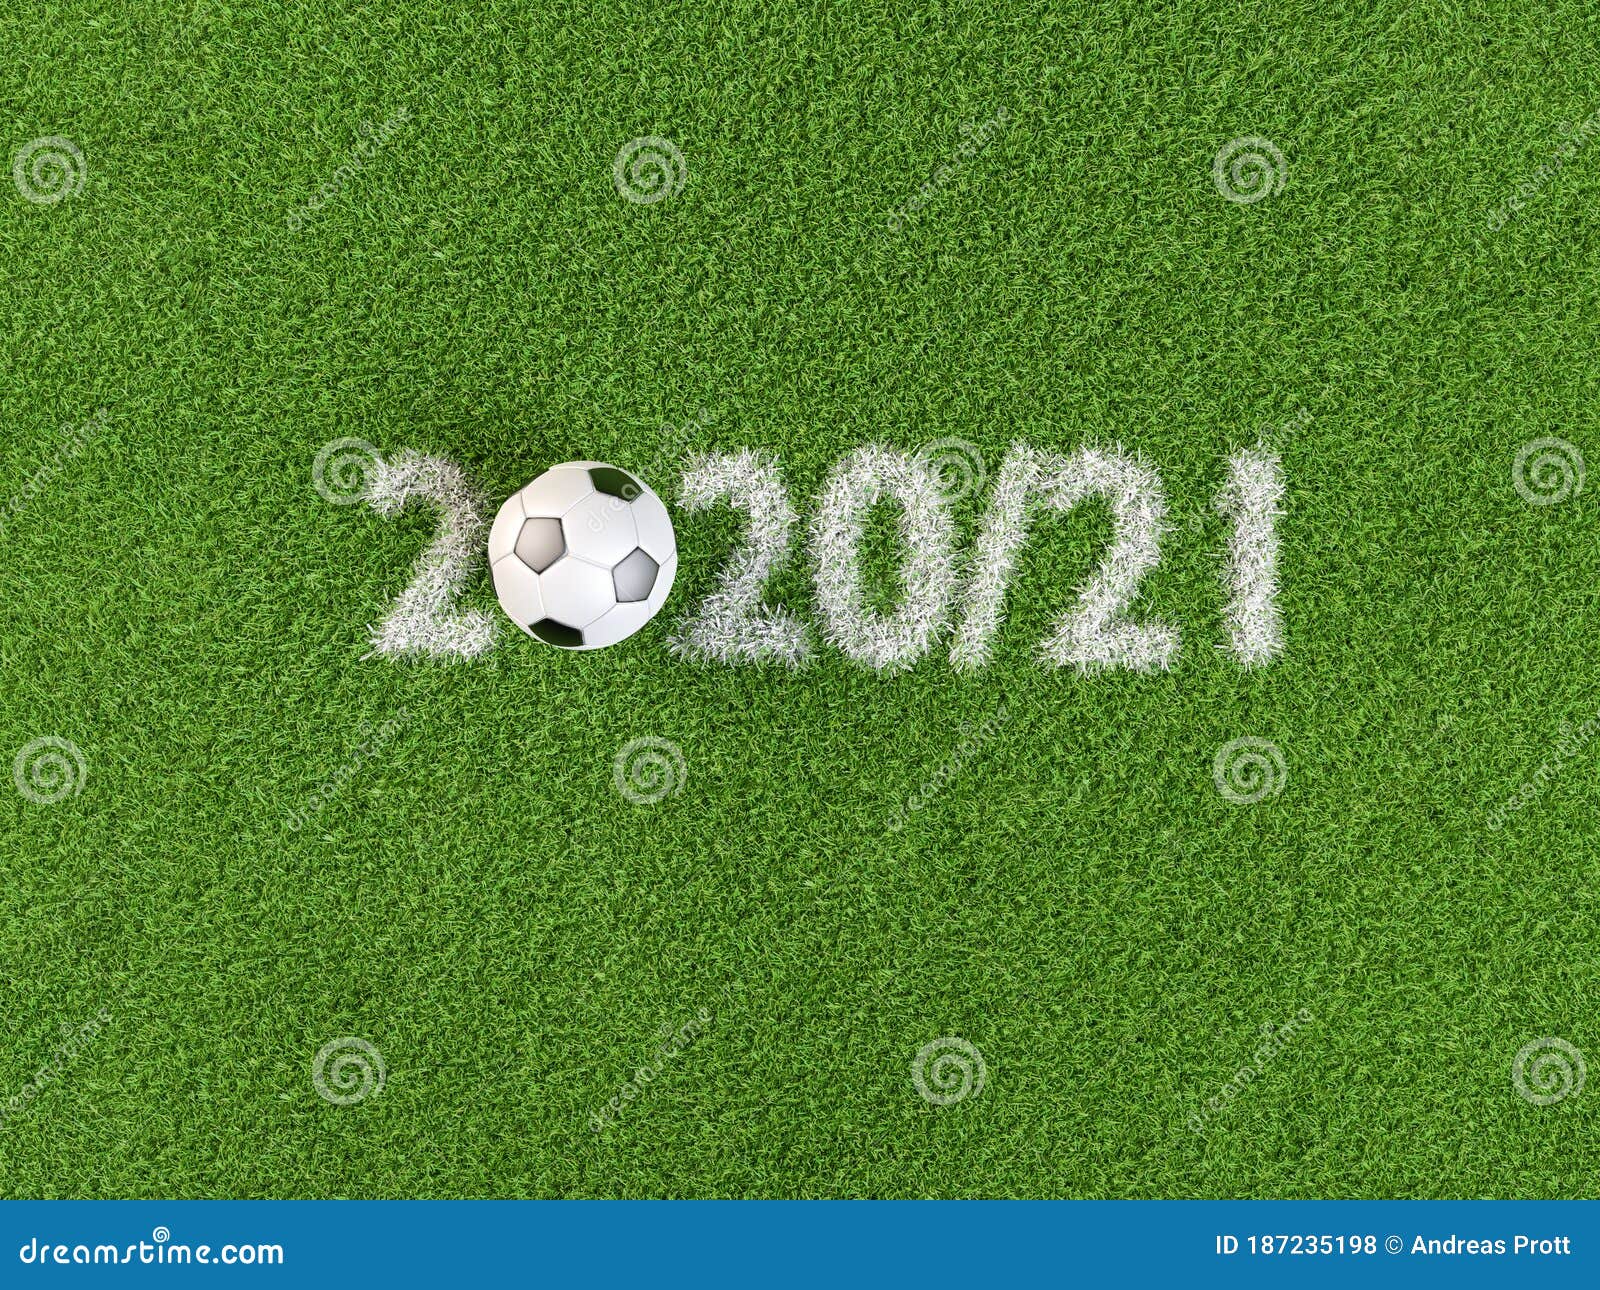 soccer ball within the dates 2020/2021. concept for the soccer / football season 2020/2021